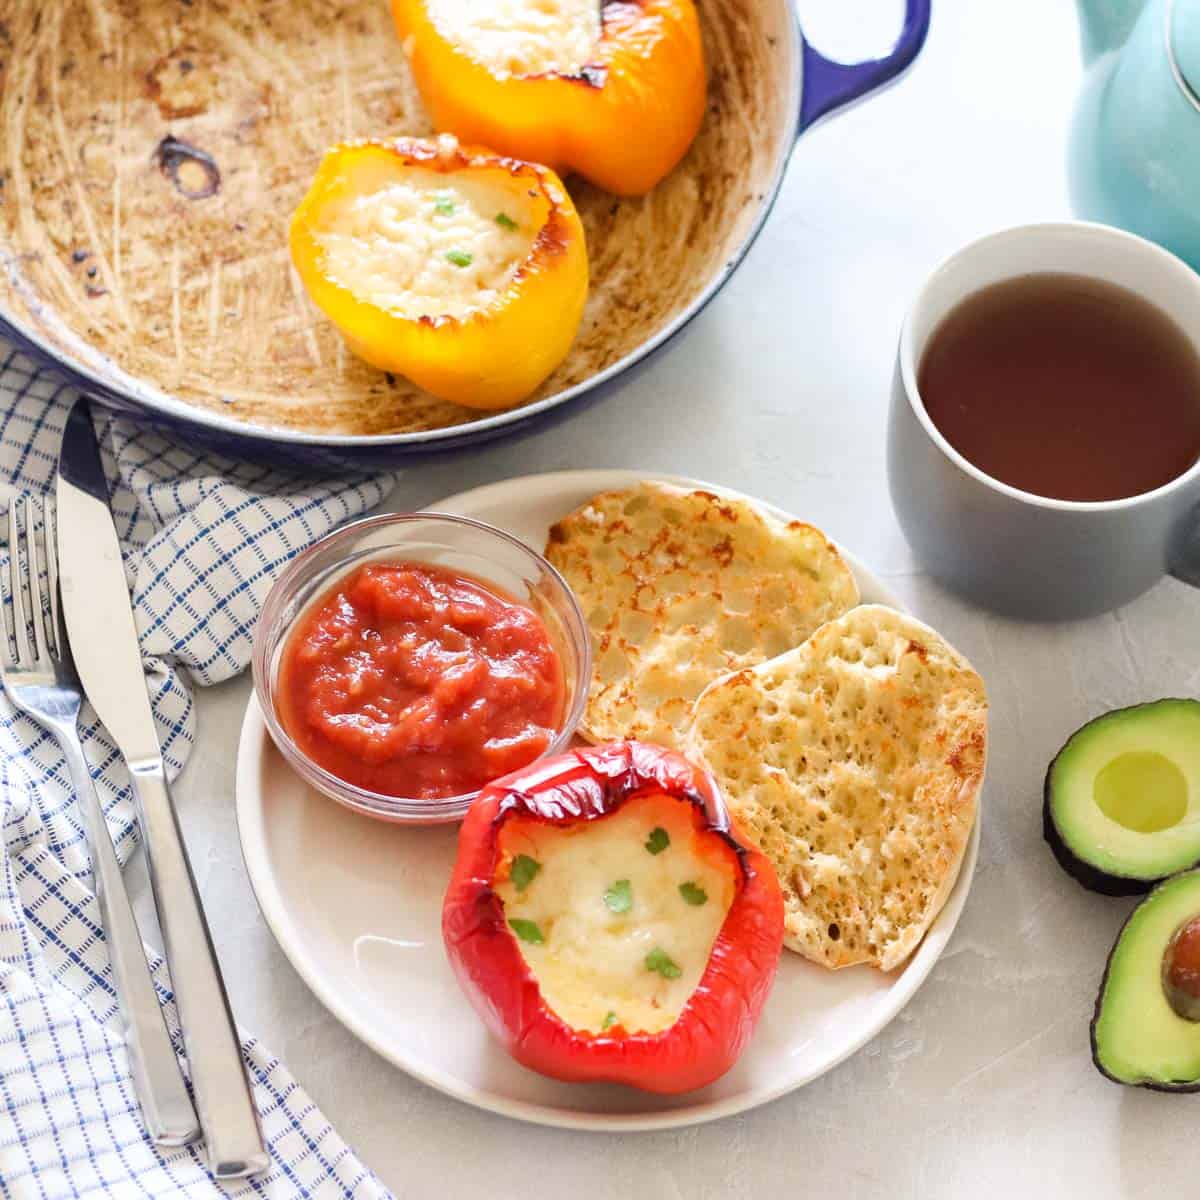 fork and knife, avocado, cup of tea, pot of stuffed breakfast peppers, and a red bell pepper stuffed with cheese and eggs on a plate next to english muffin and bowl of salsa.